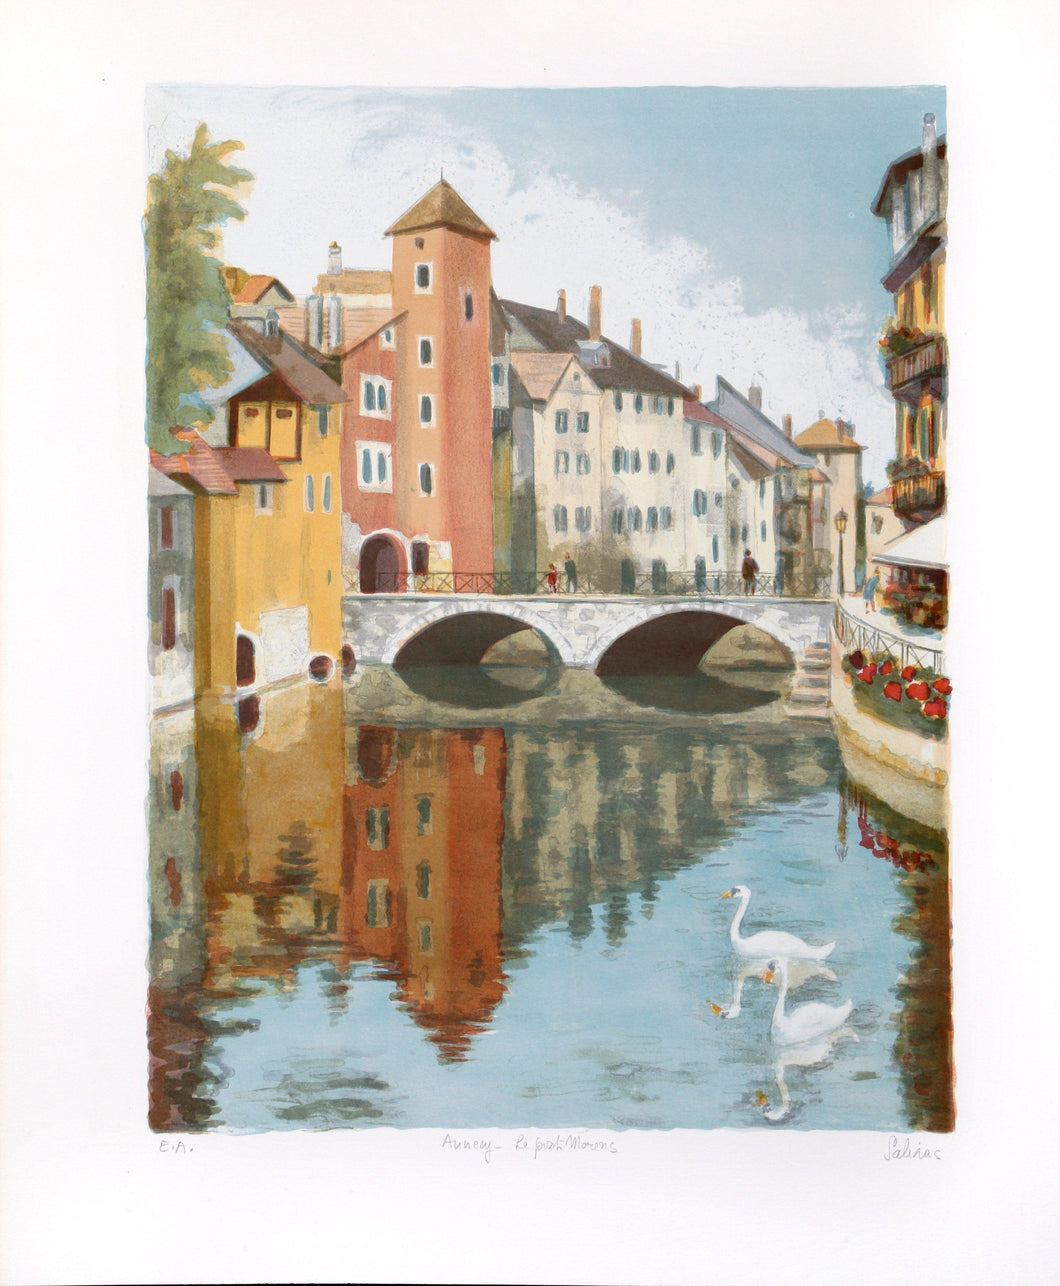 Annecy - Le Pont Morens Lithograph | Laurent Marcel Salinas,{{product.type}}